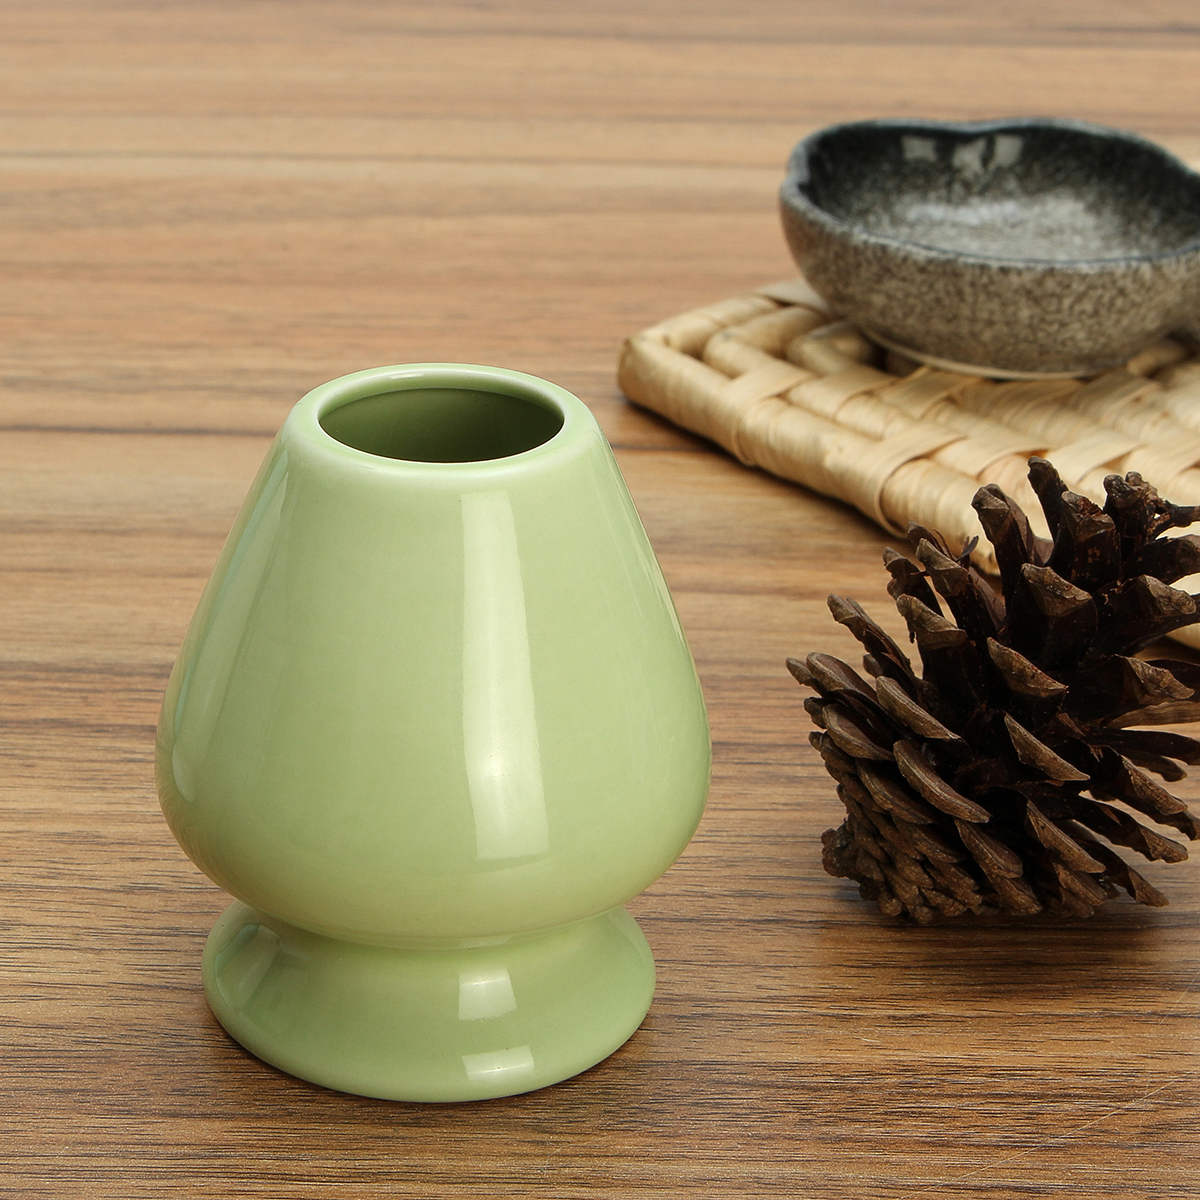 Matcha Whisk Holder Ceramic Chasen Stand Japanese Tea Bamboo Tealyra Whisk Scoop Decorations